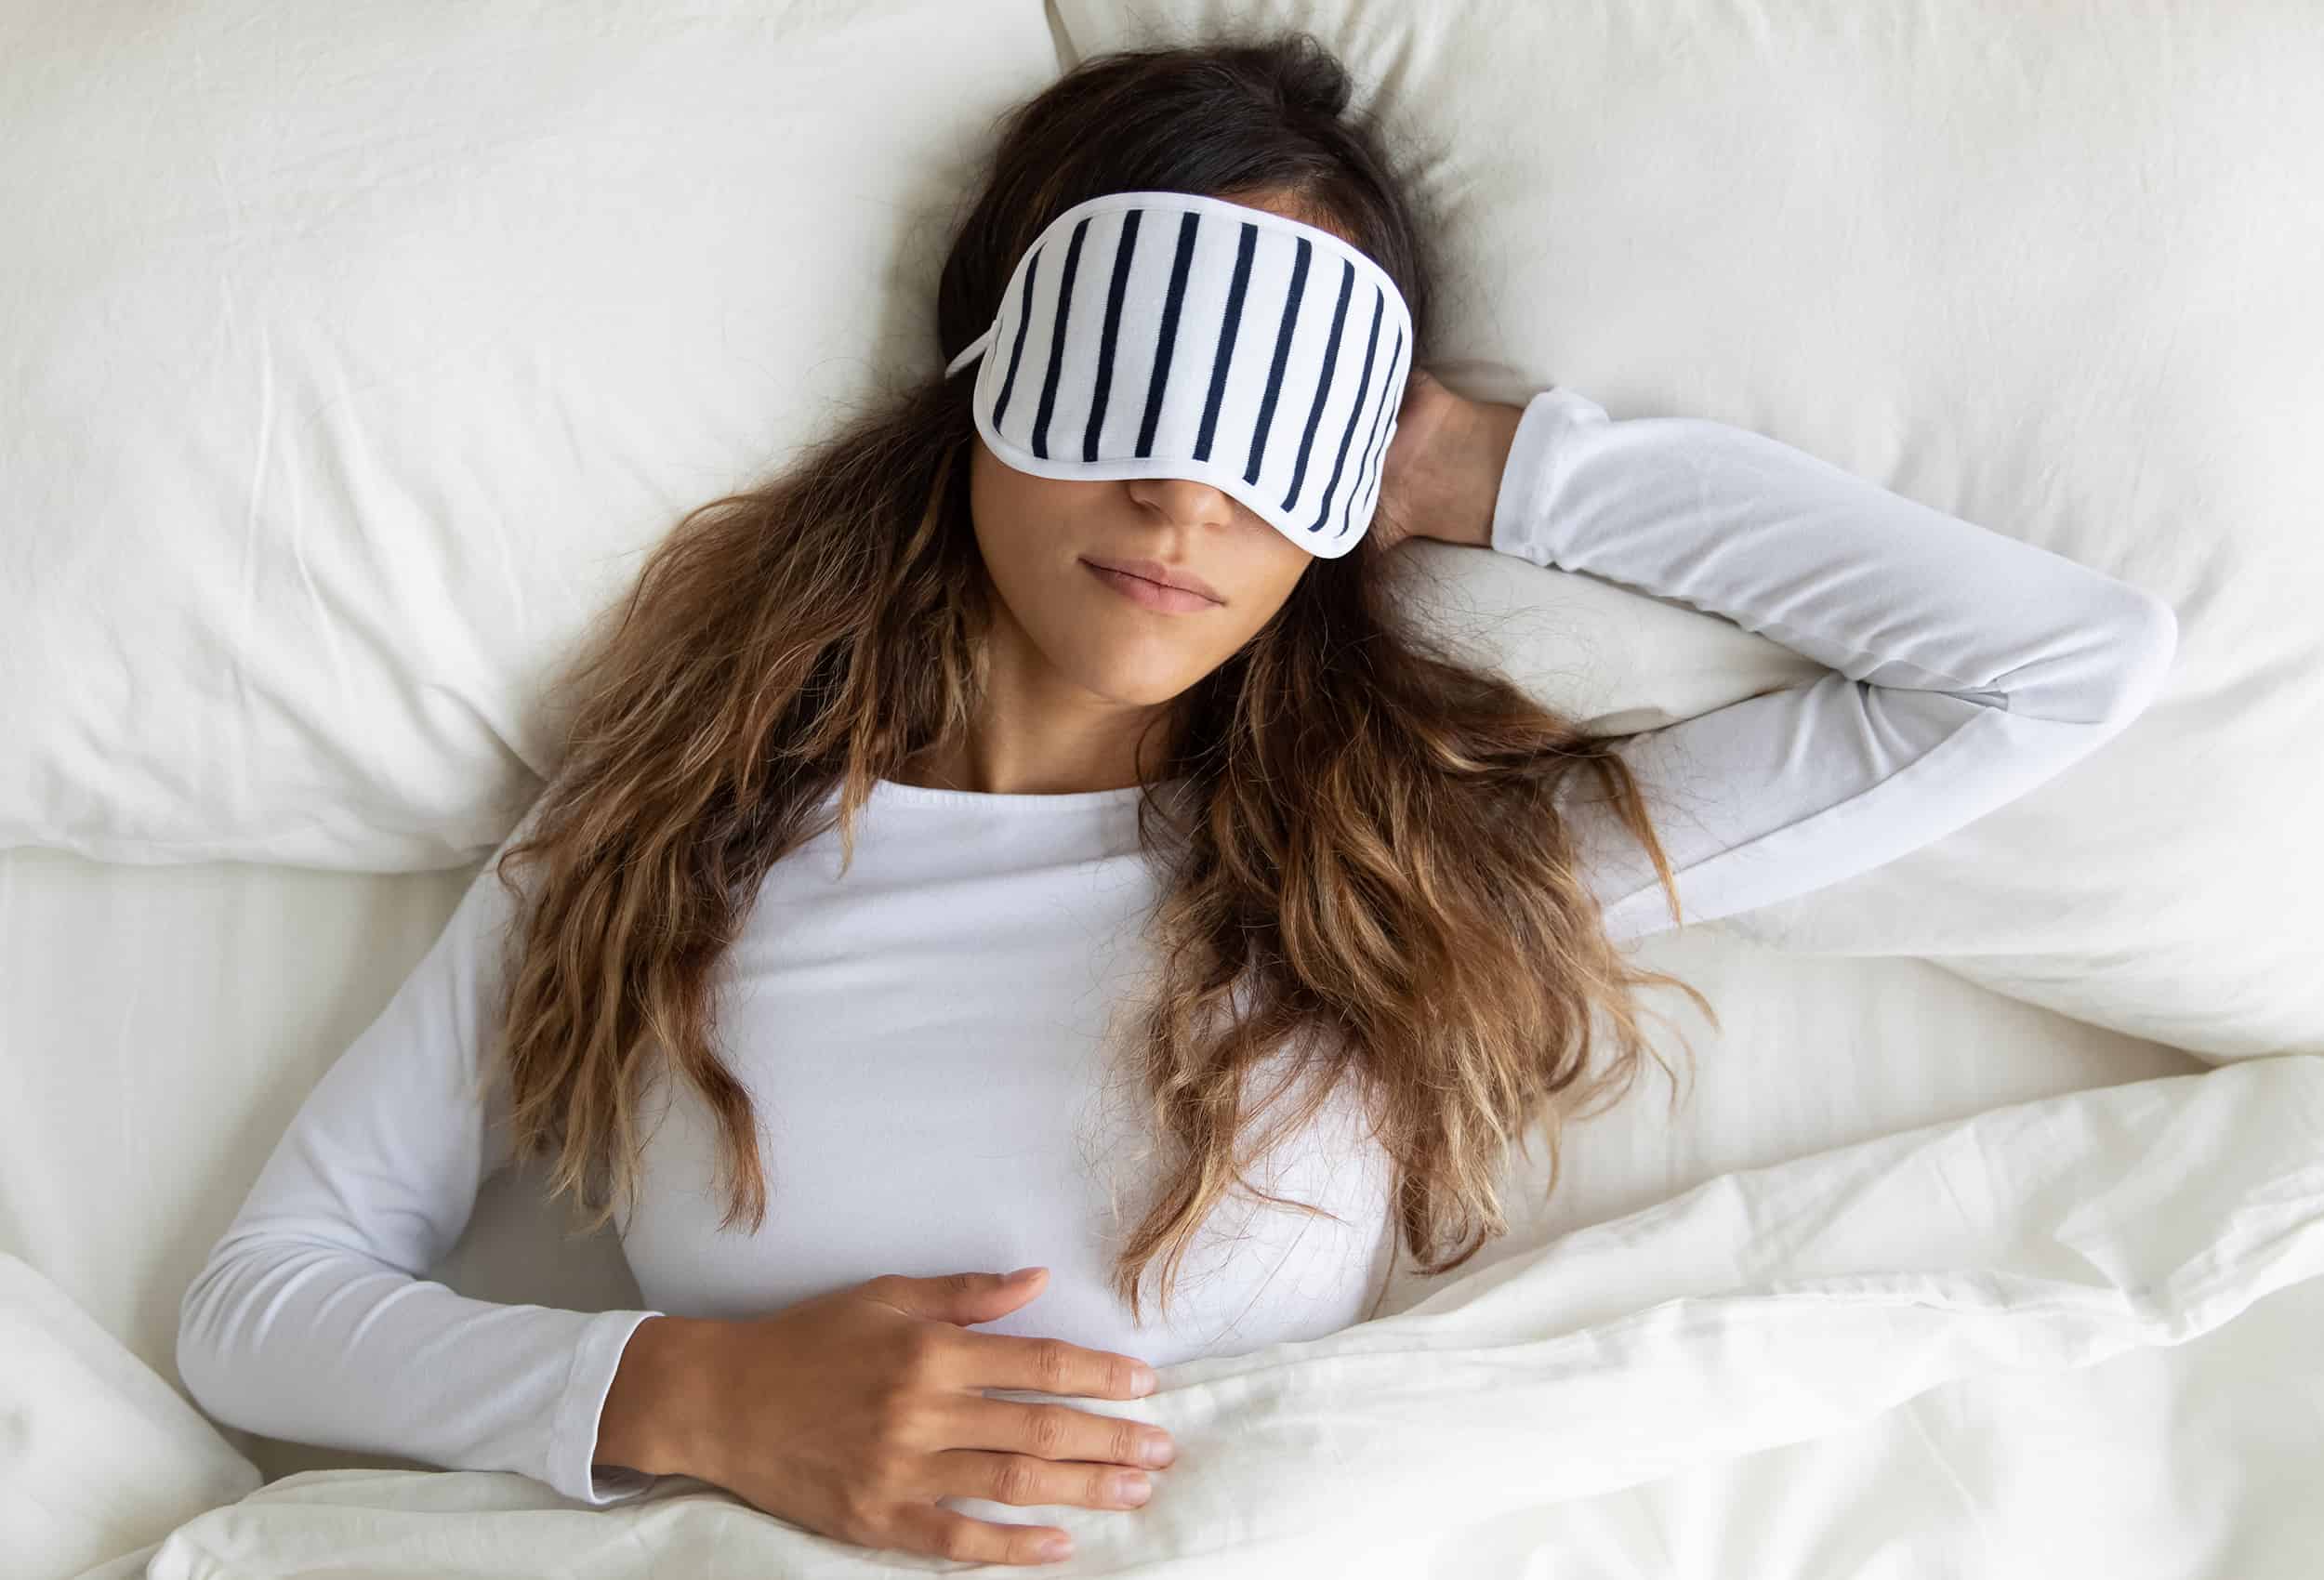 calm-peaceful-woman-wearing-white-and-pin-striped-sleep-mask-laying-in-bed